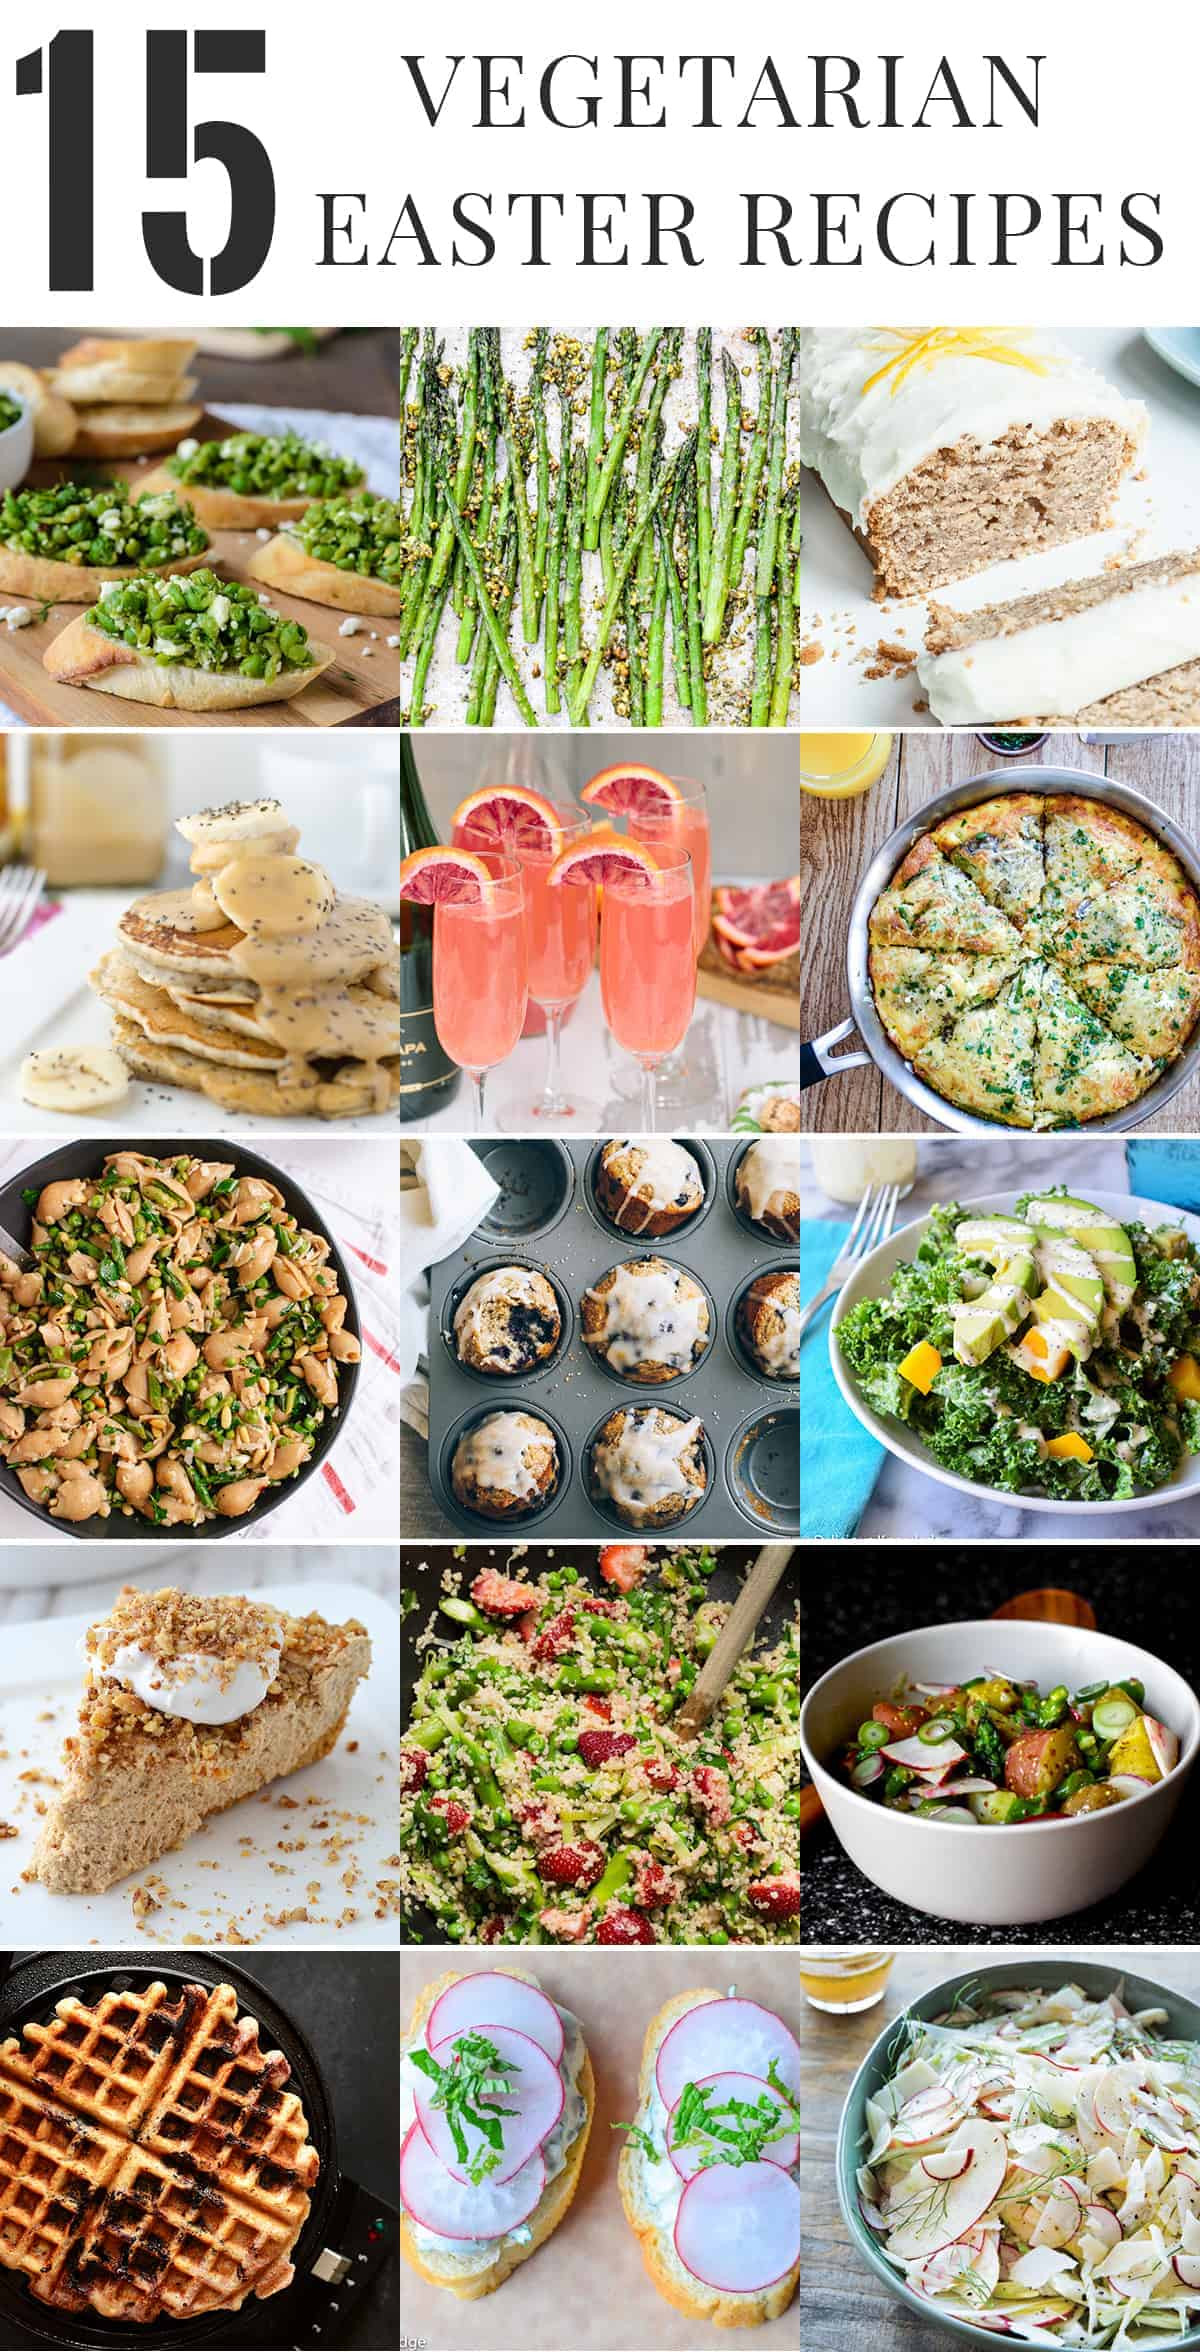 Healthy Easter Dinner Recipes
 Healthy Ve arian Easter Recipes Delish Knowledge